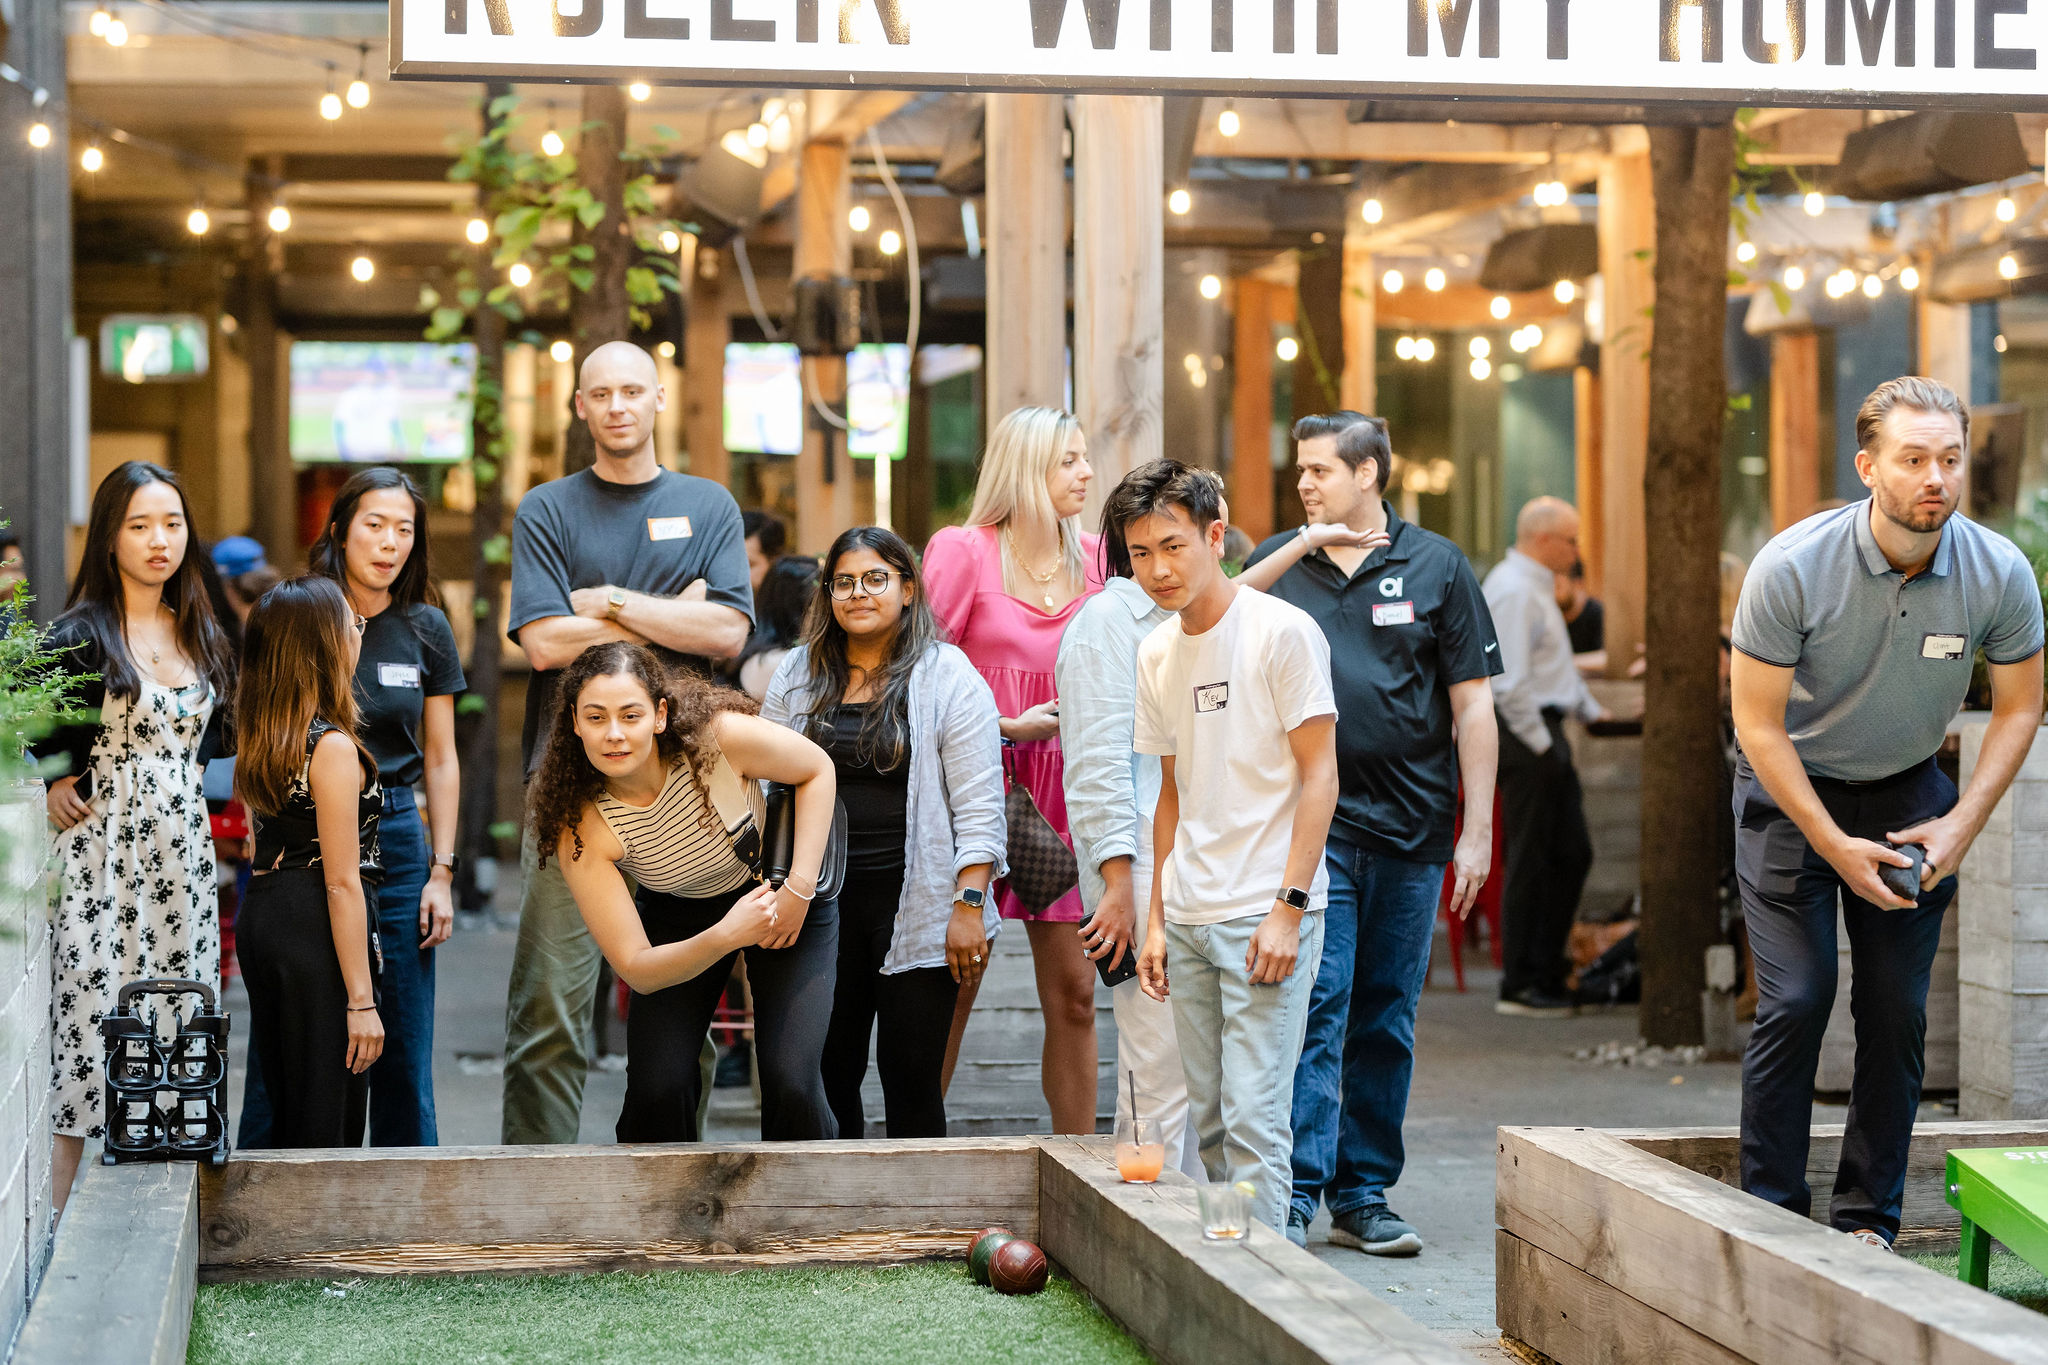 A group of people participating in a social event playing shuffleboard.